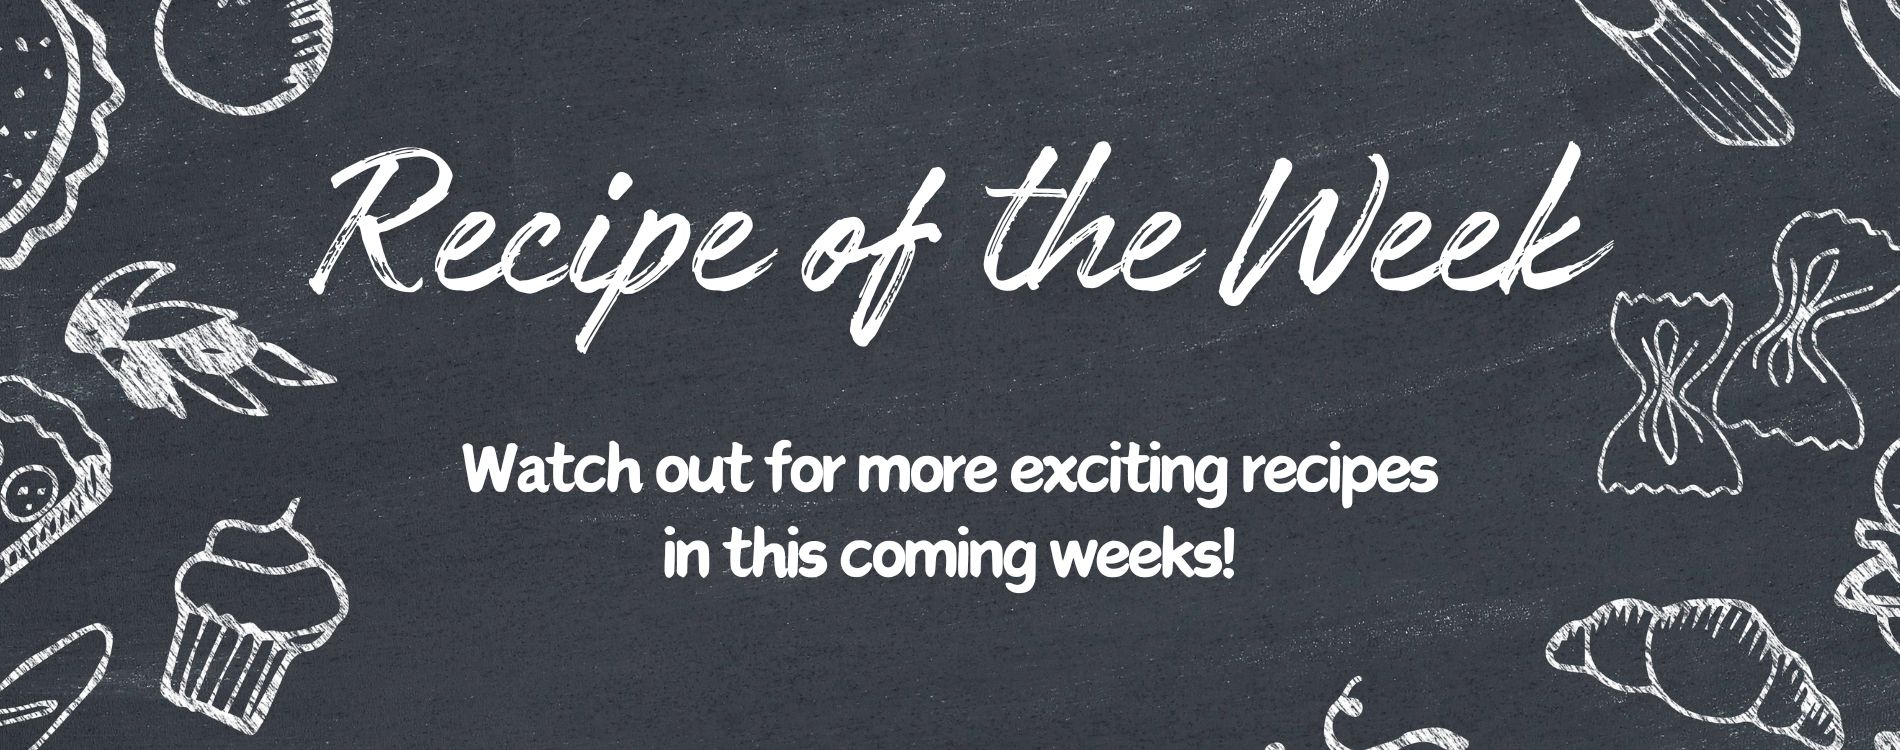 Recipe of the Week Banner